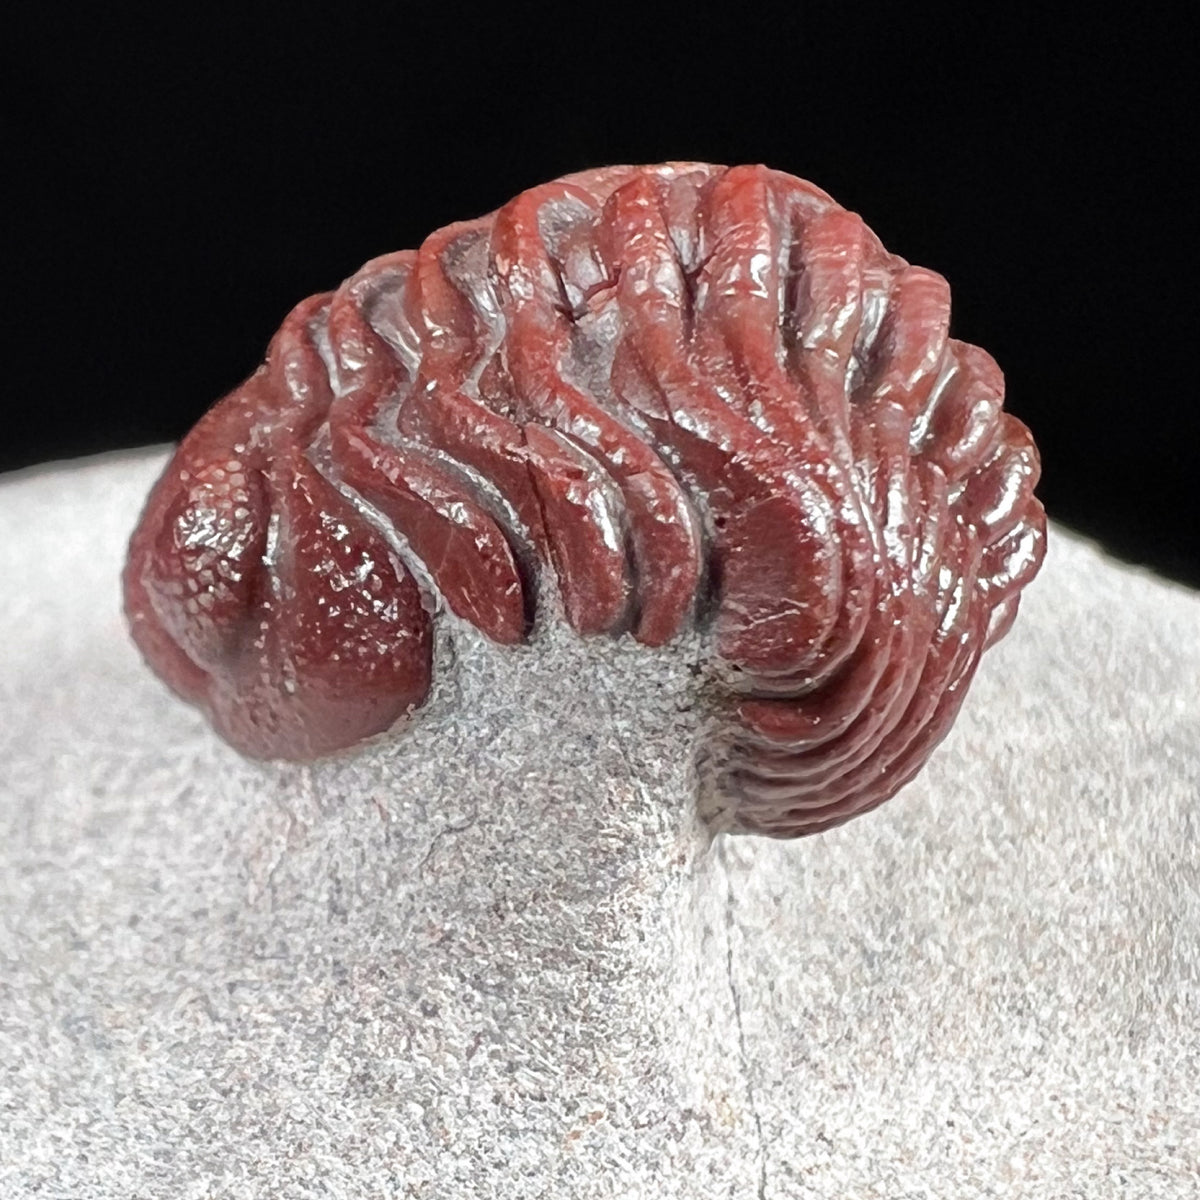 Side View of Austerops Trilobite Fossil